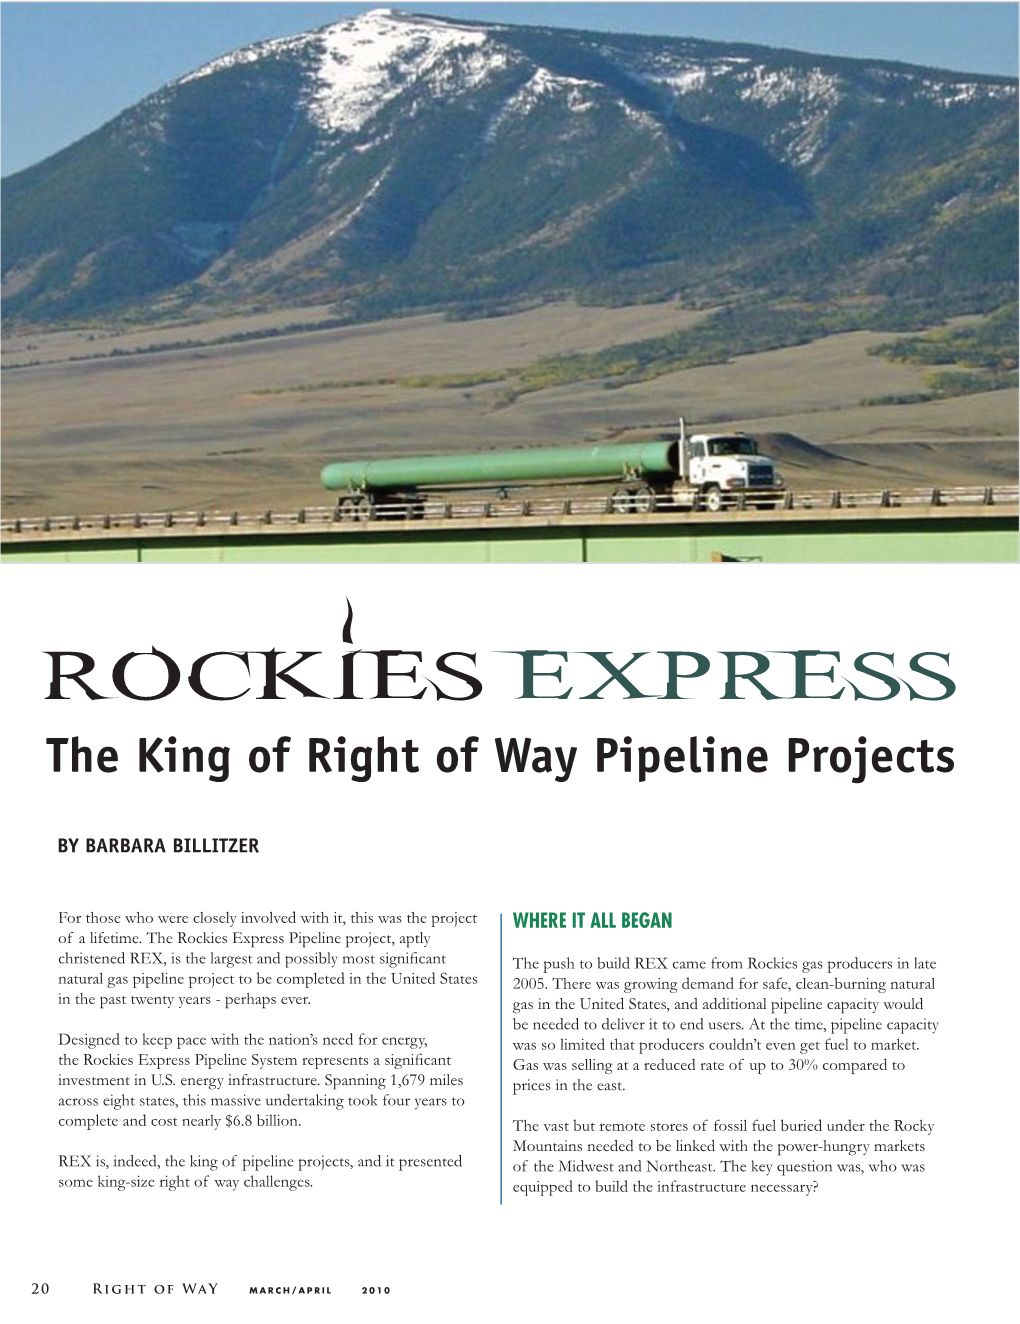 Rockies Express the King of Right of Way Pipeline Projects